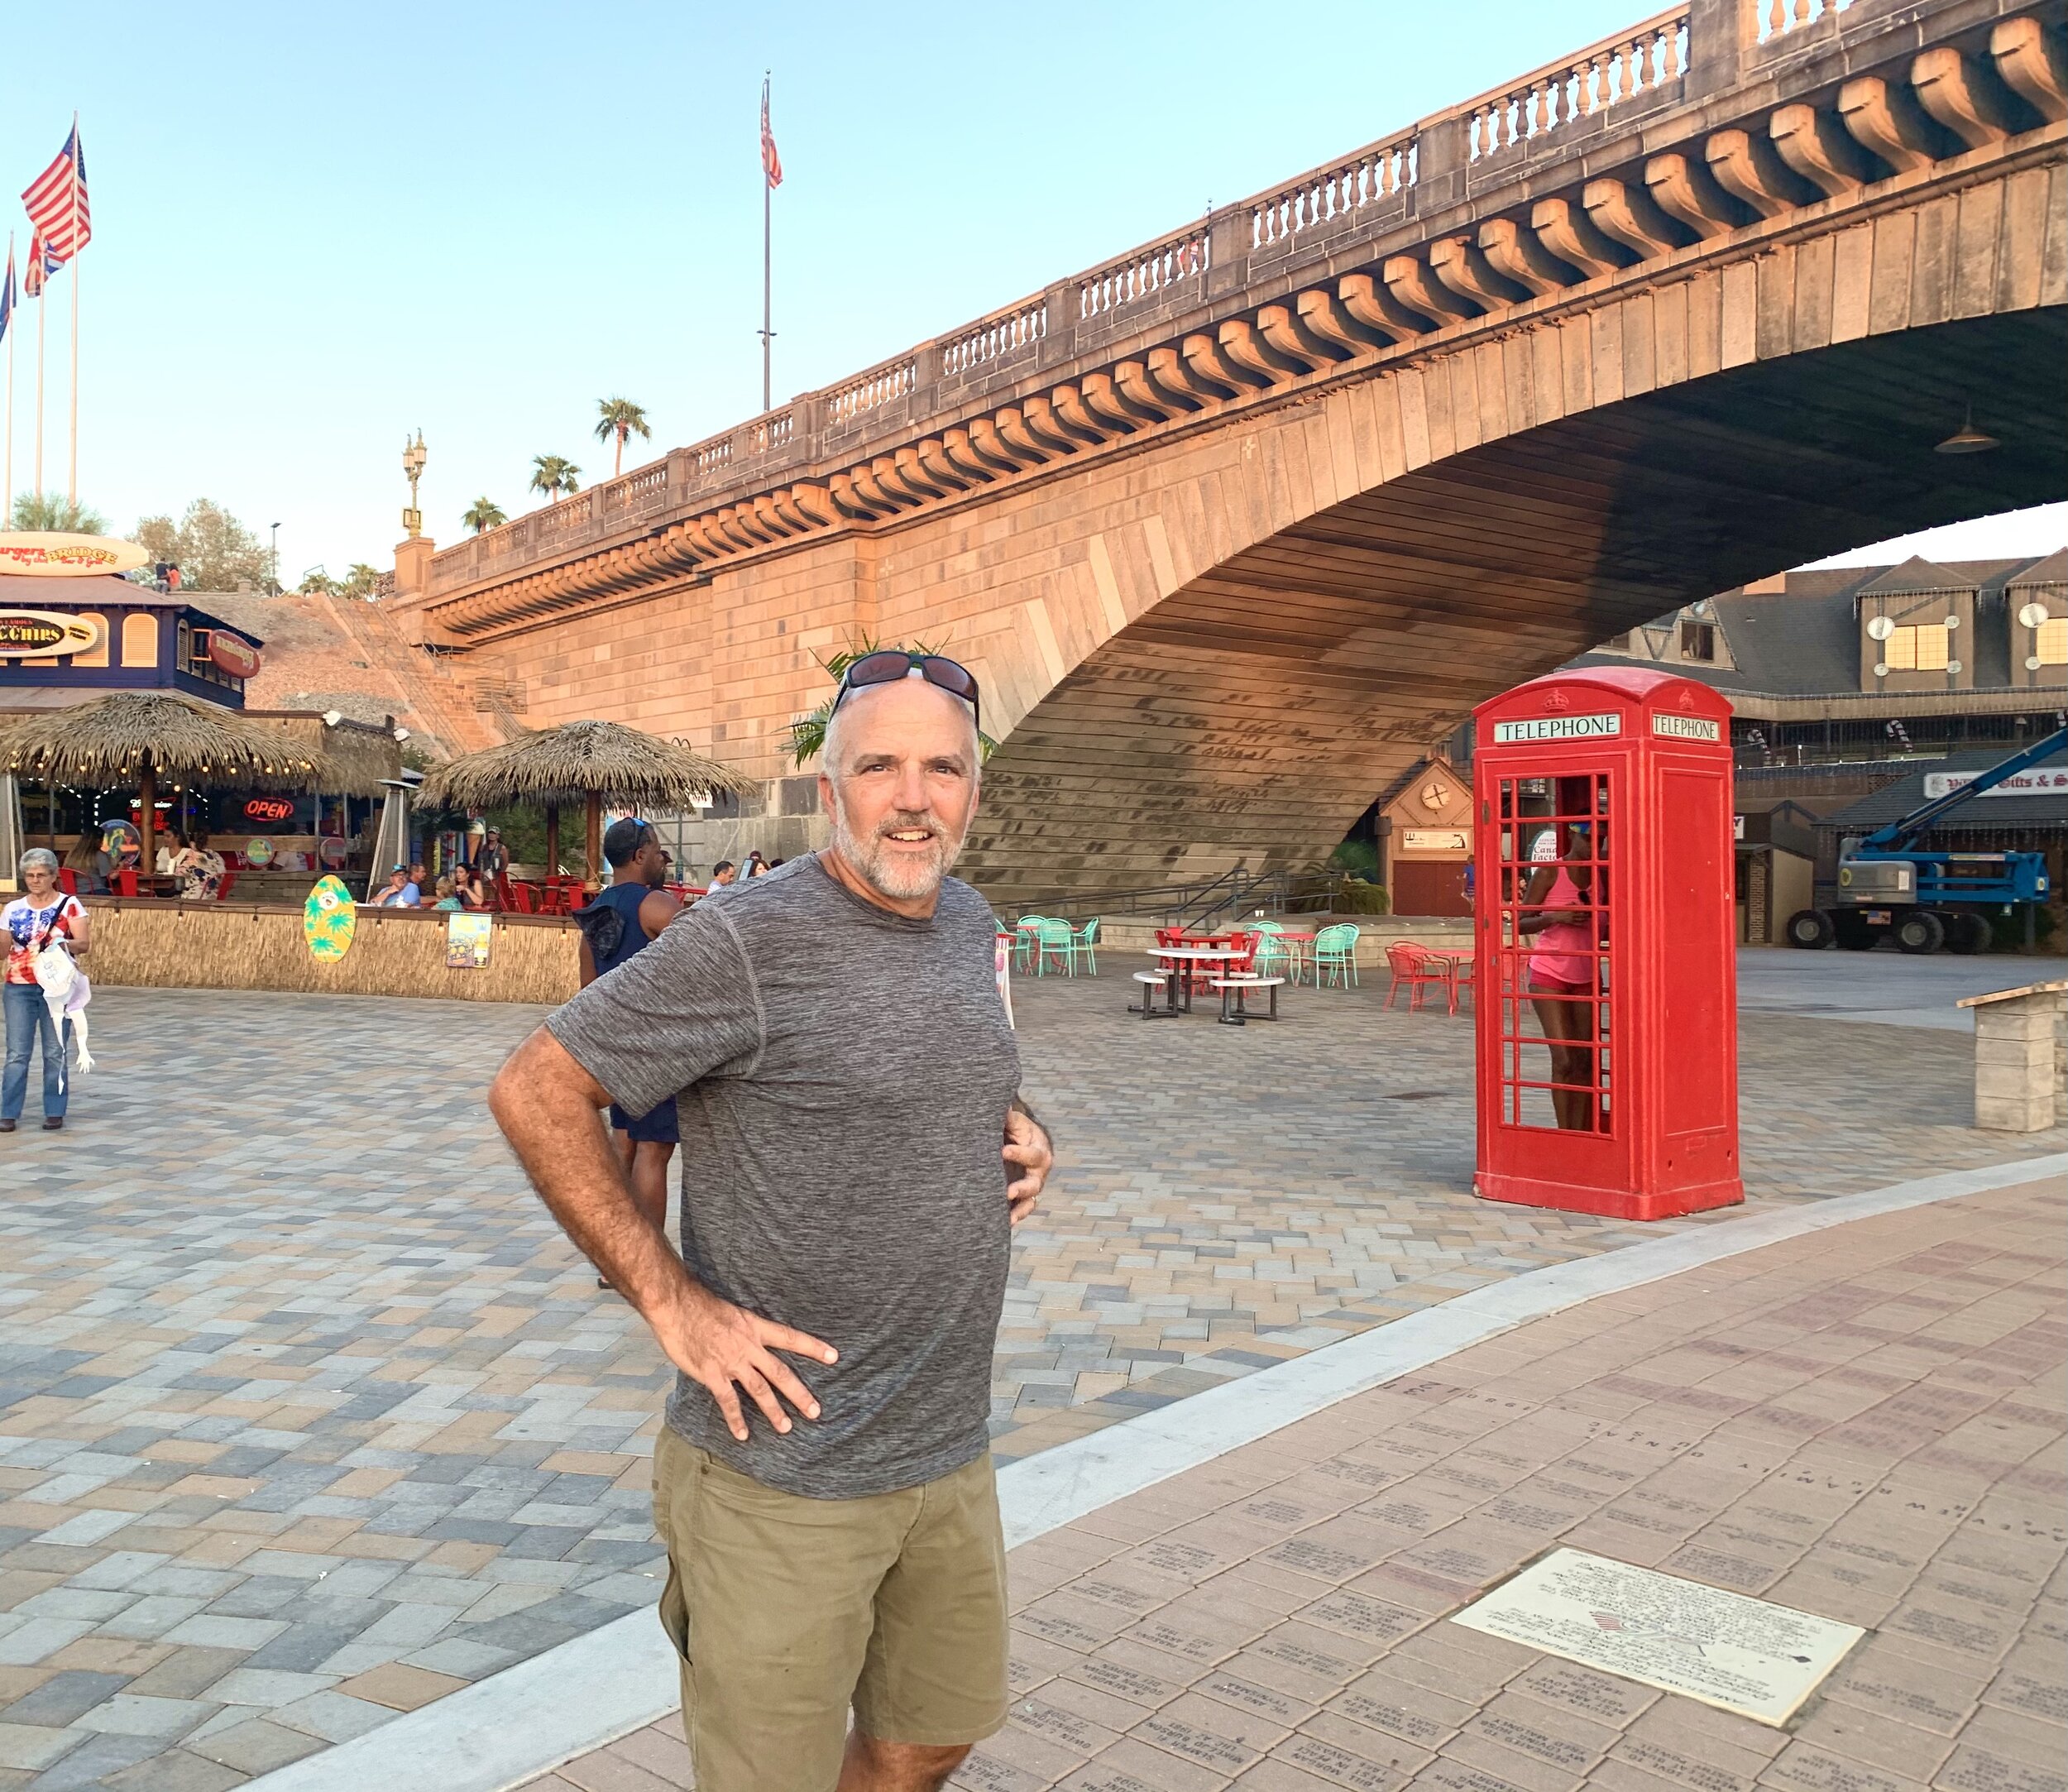  Did you know that when  London Bridge  was falling down, an American tycoon bought it and shipped it to his community in   Arizona  ? Developer and founder of Lake Havasu City, Robert McCulloch, struggled to attract tourists and homebuyers to Lake H